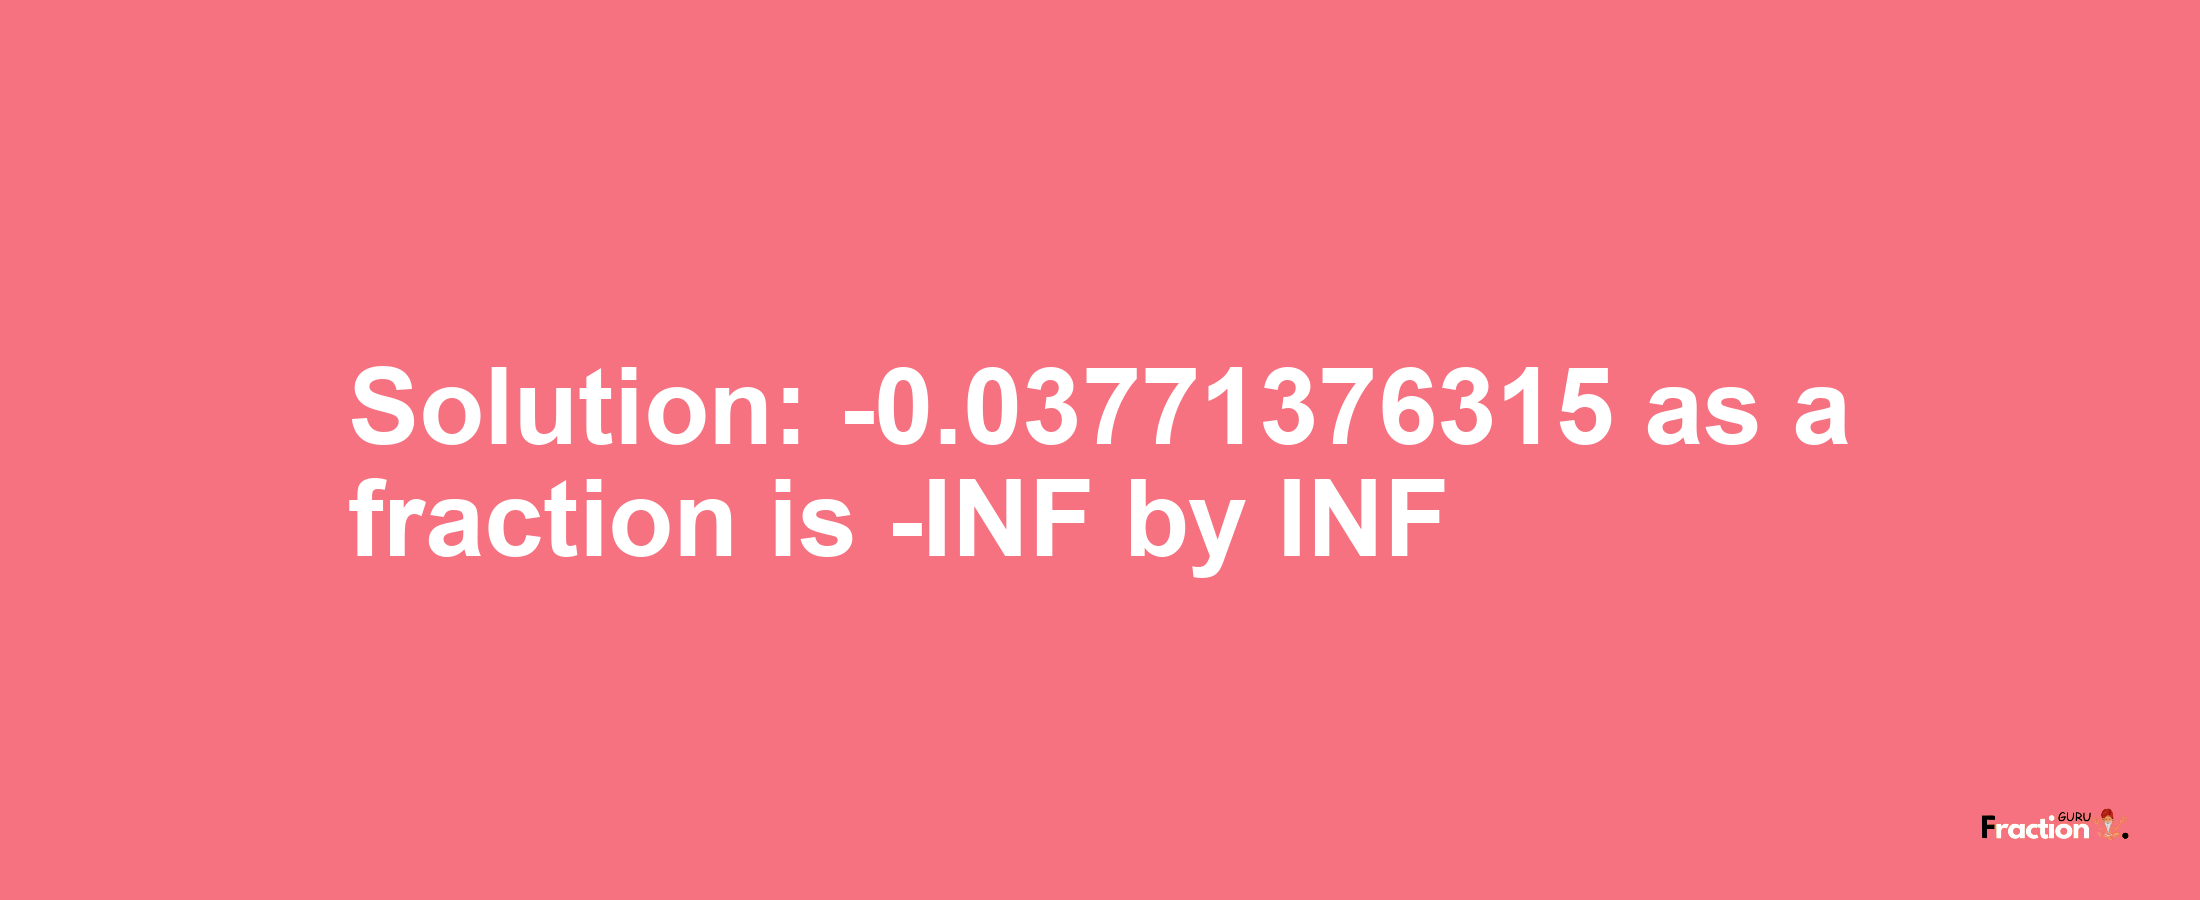 Solution:-0.03771376315 as a fraction is -INF/INF